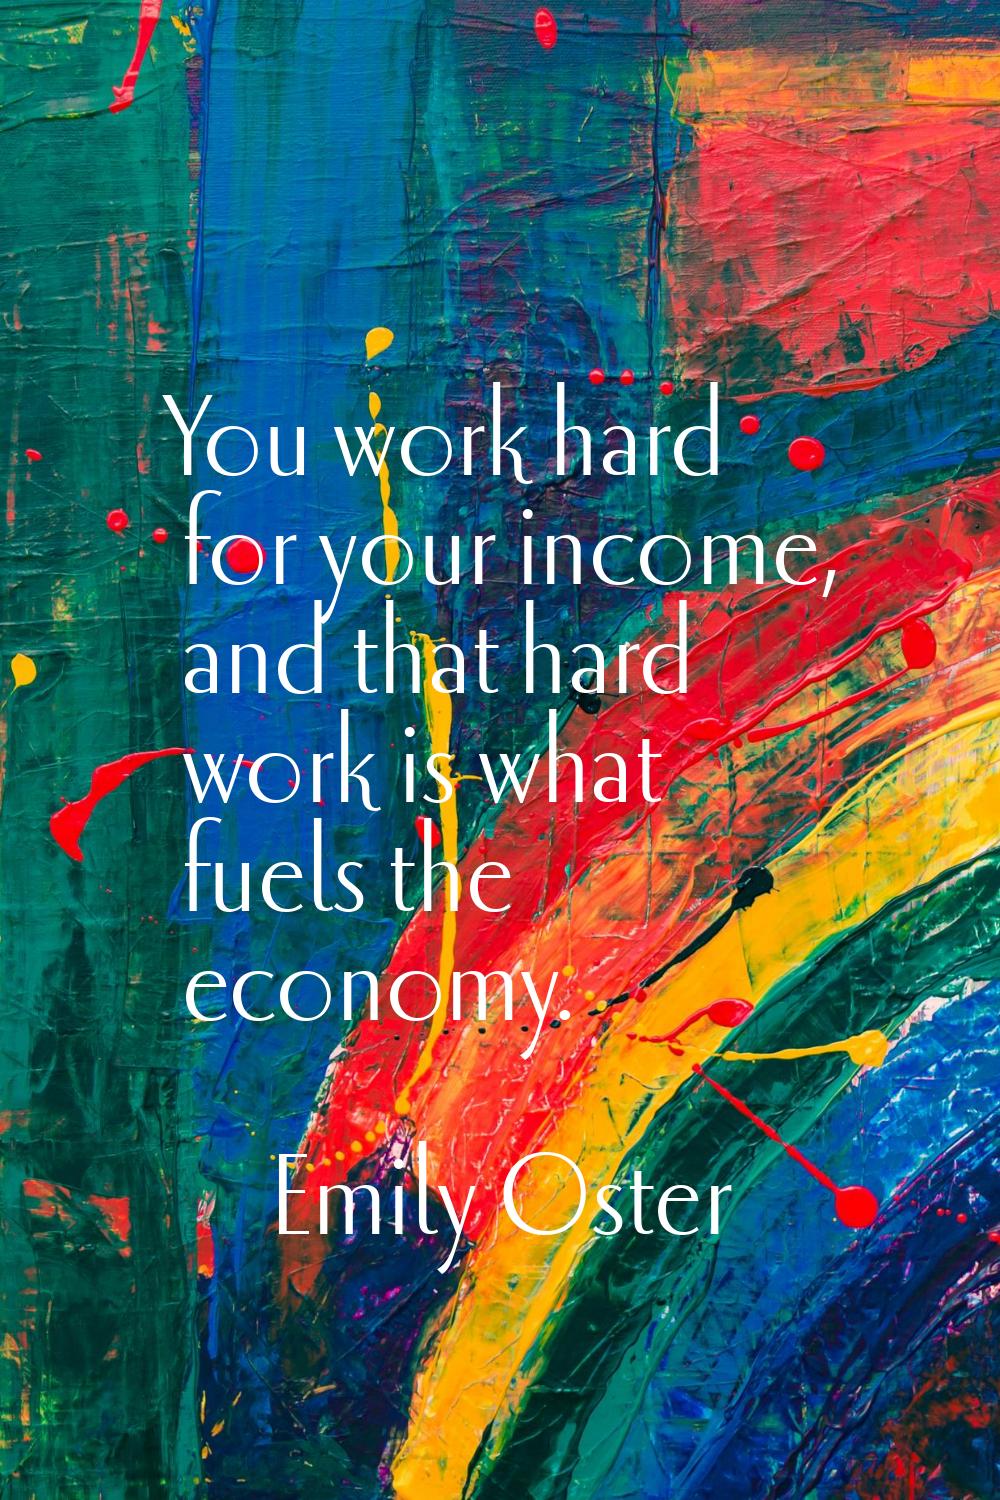 You work hard for your income, and that hard work is what fuels the economy.